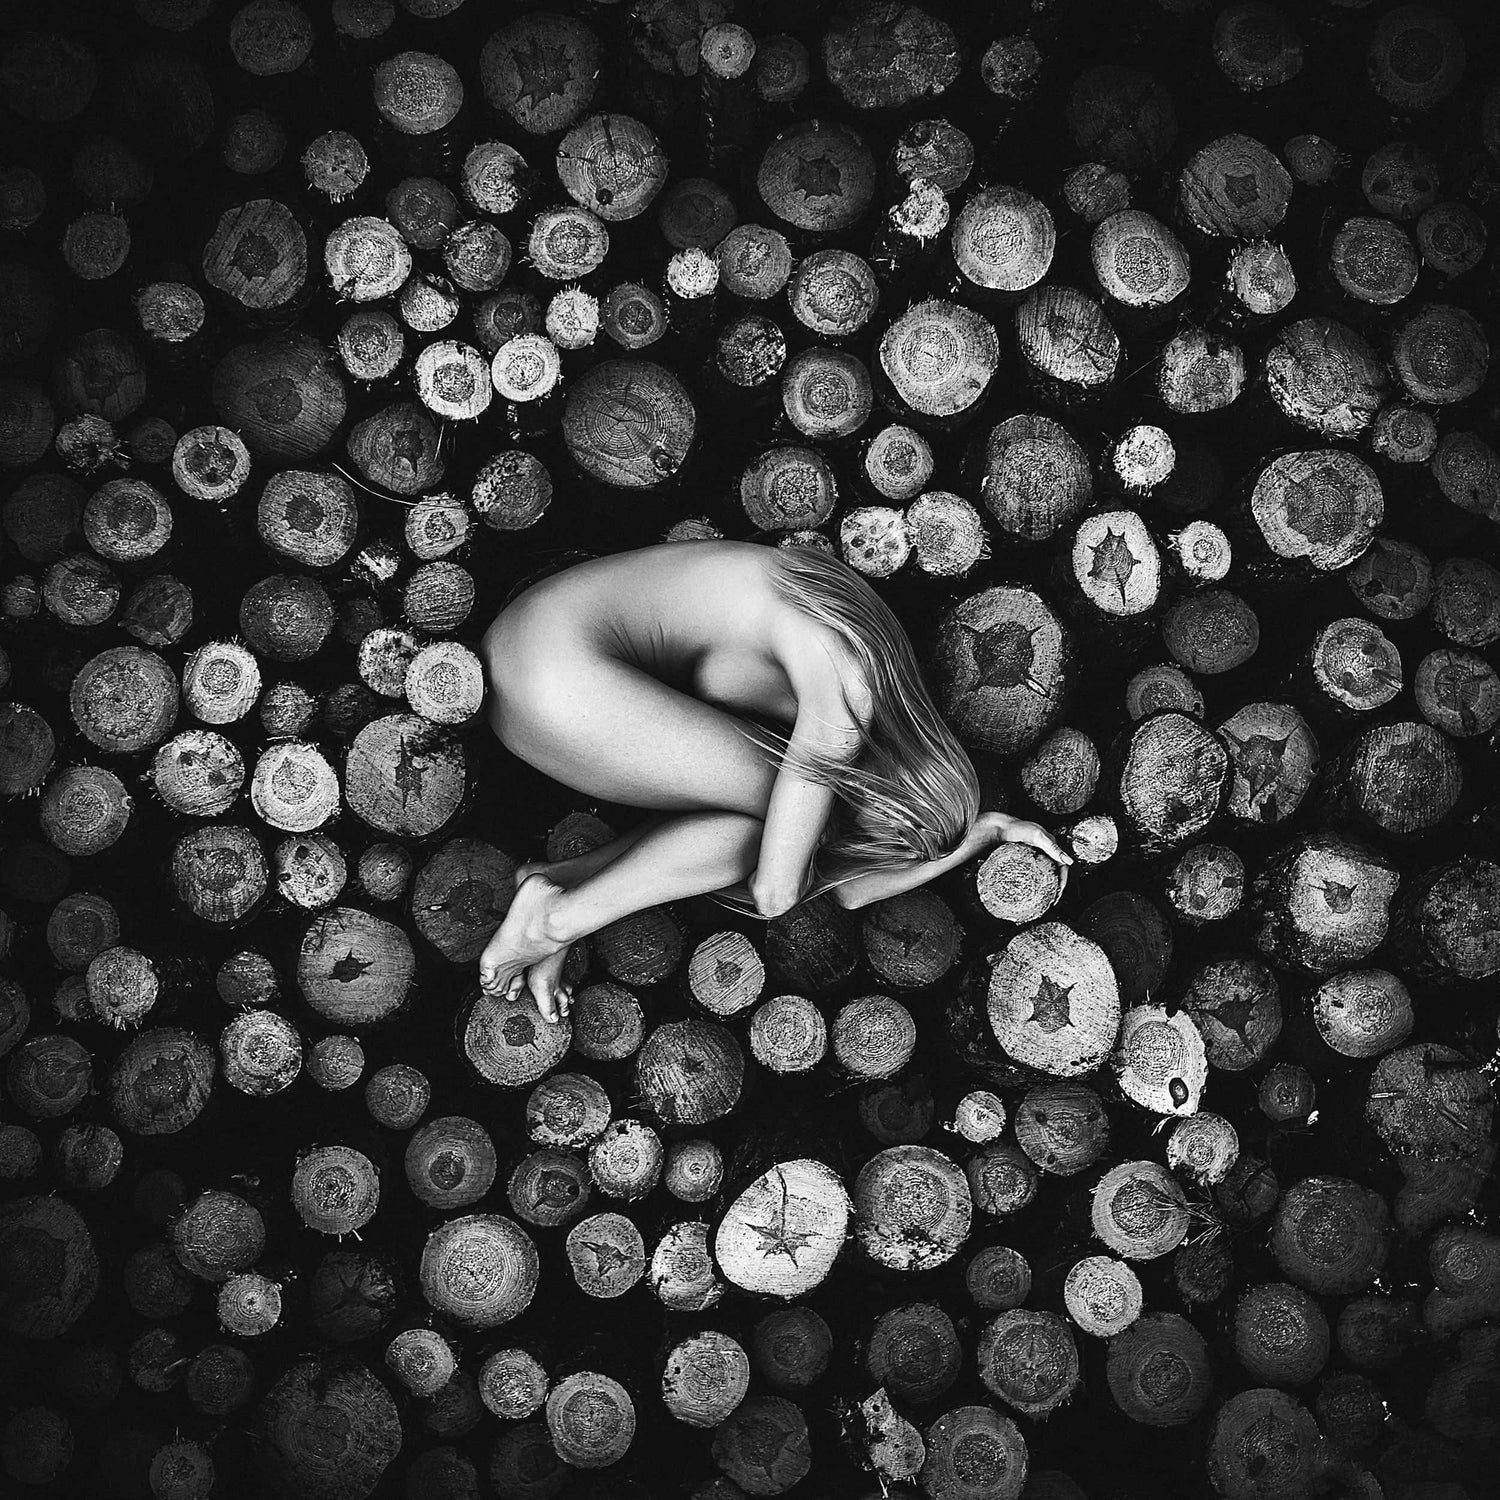 Fine artwork of an anonymous woman curled up on standing tree trunks, with hair cascading over her head and shoulders, in a black and white capture by Ruslan Bolgov.